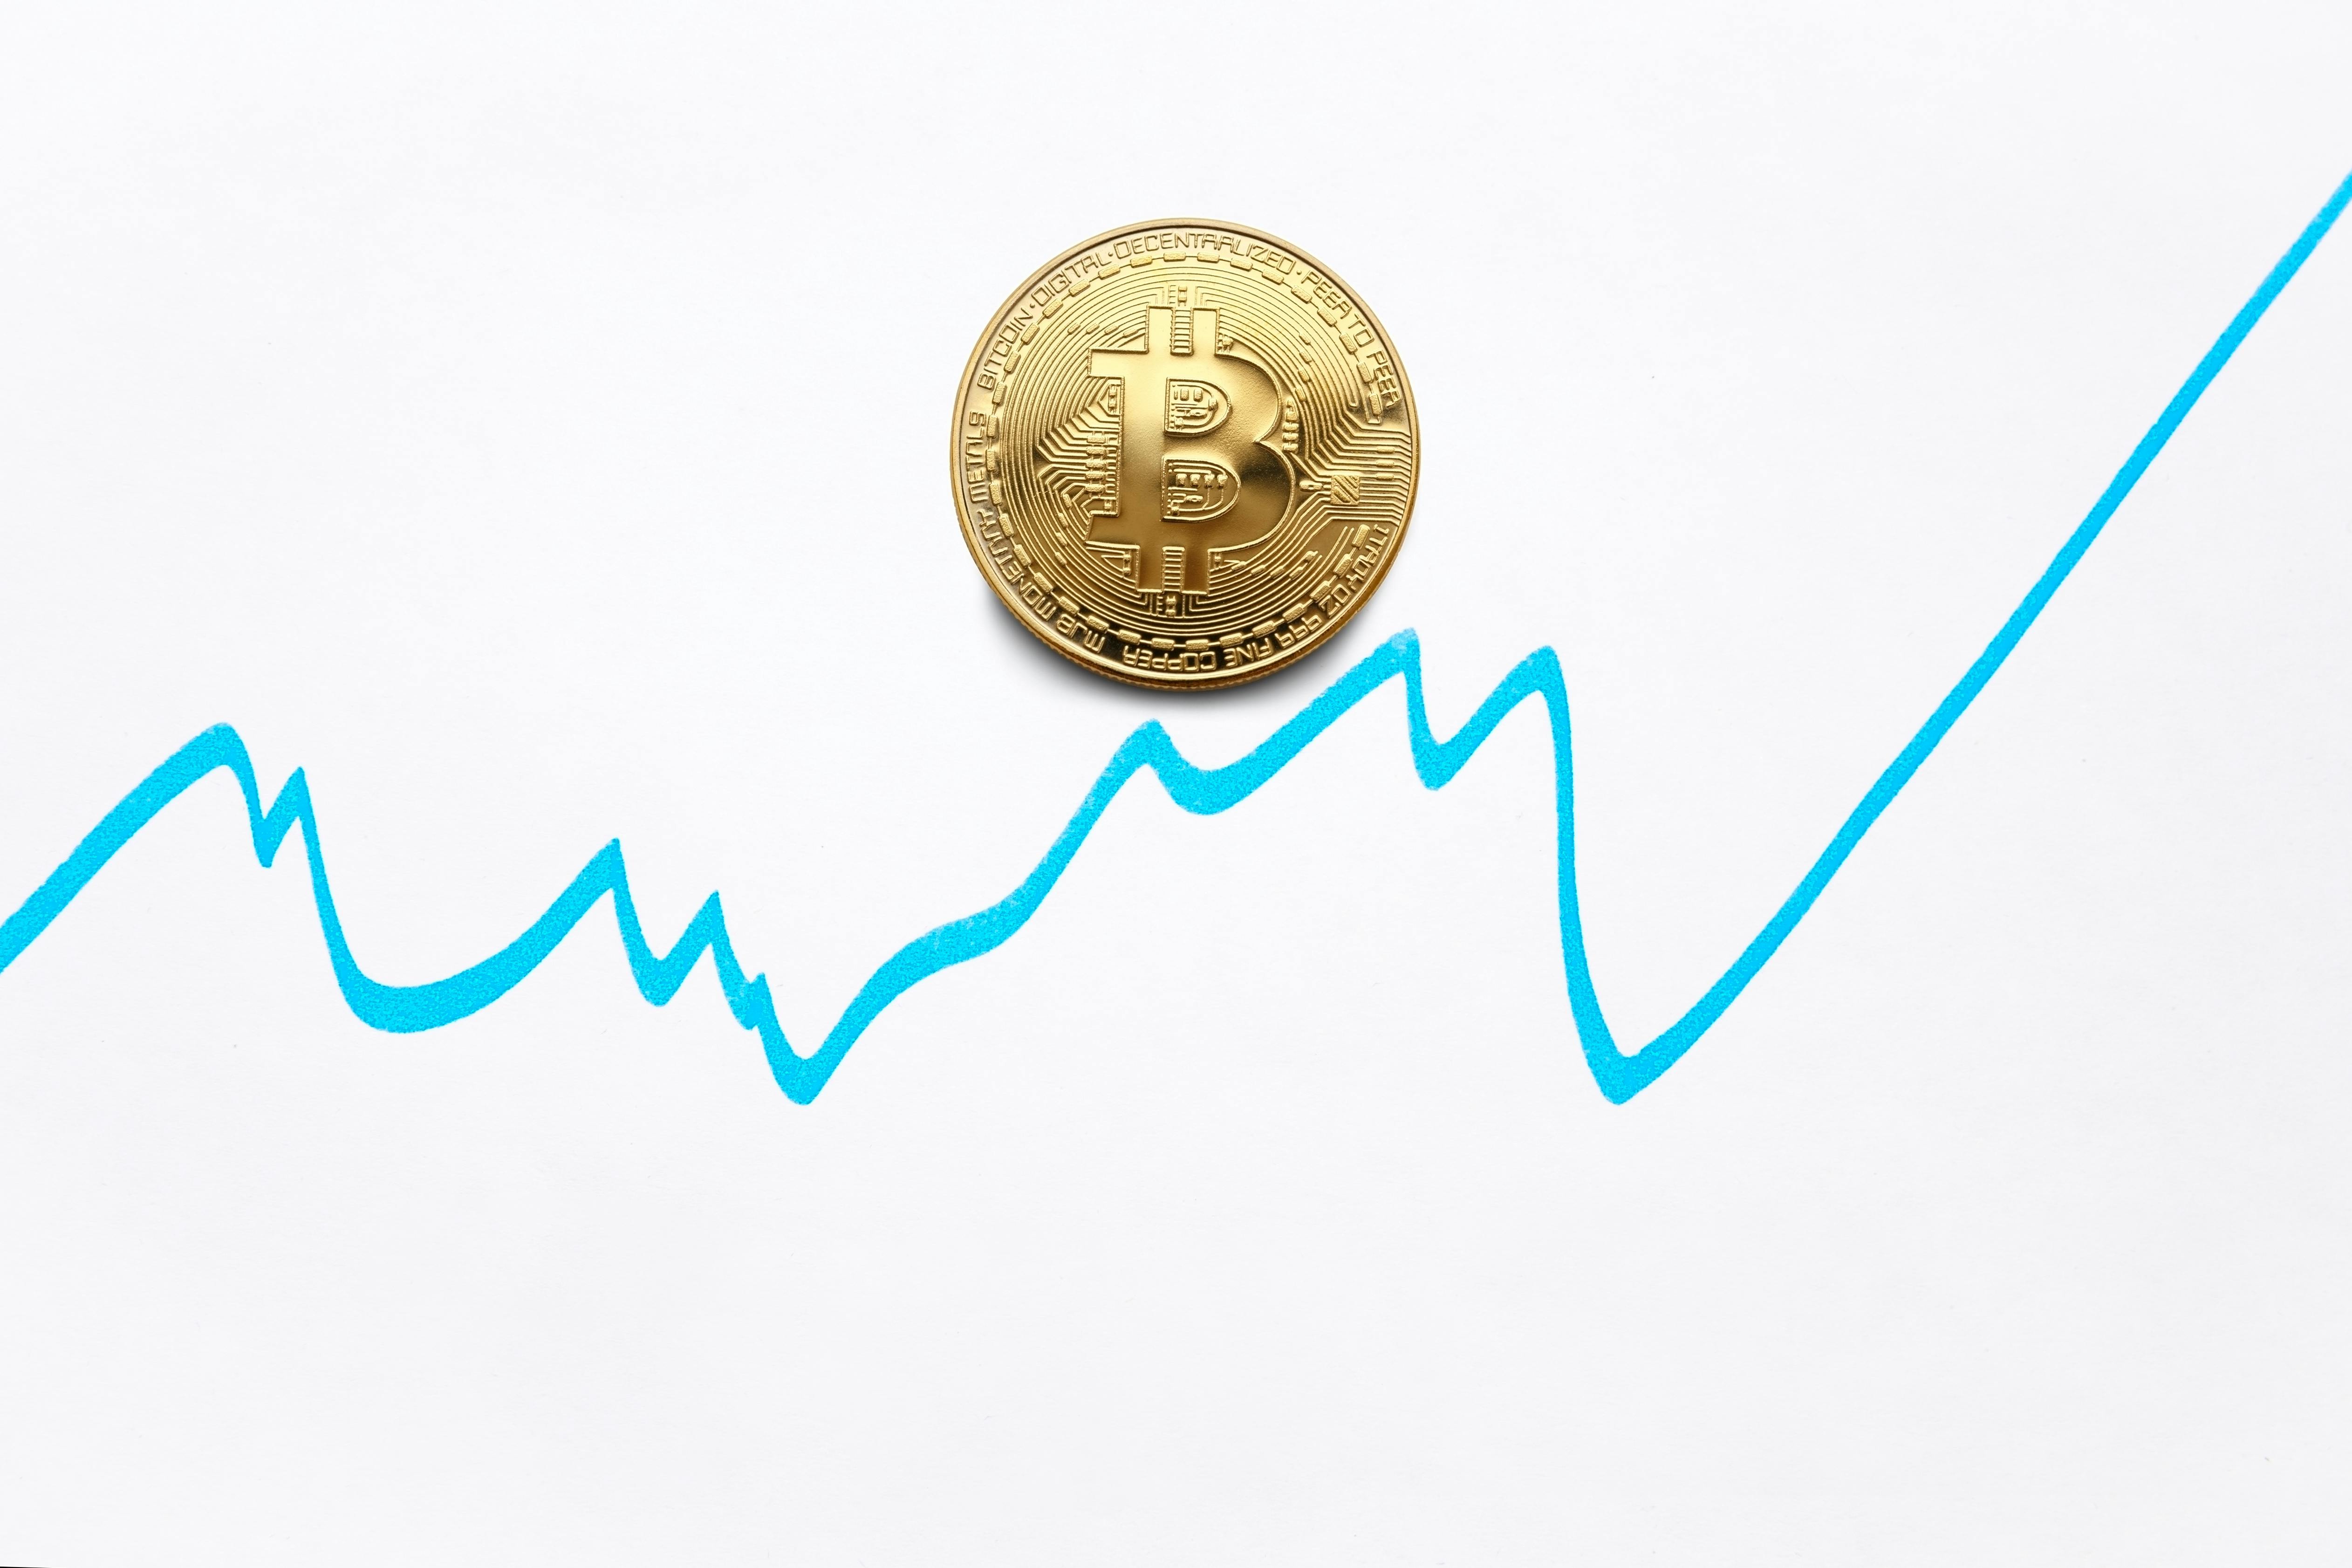 Bollinger Bands Creator Says Bitcoin Downtrend Might Be Over